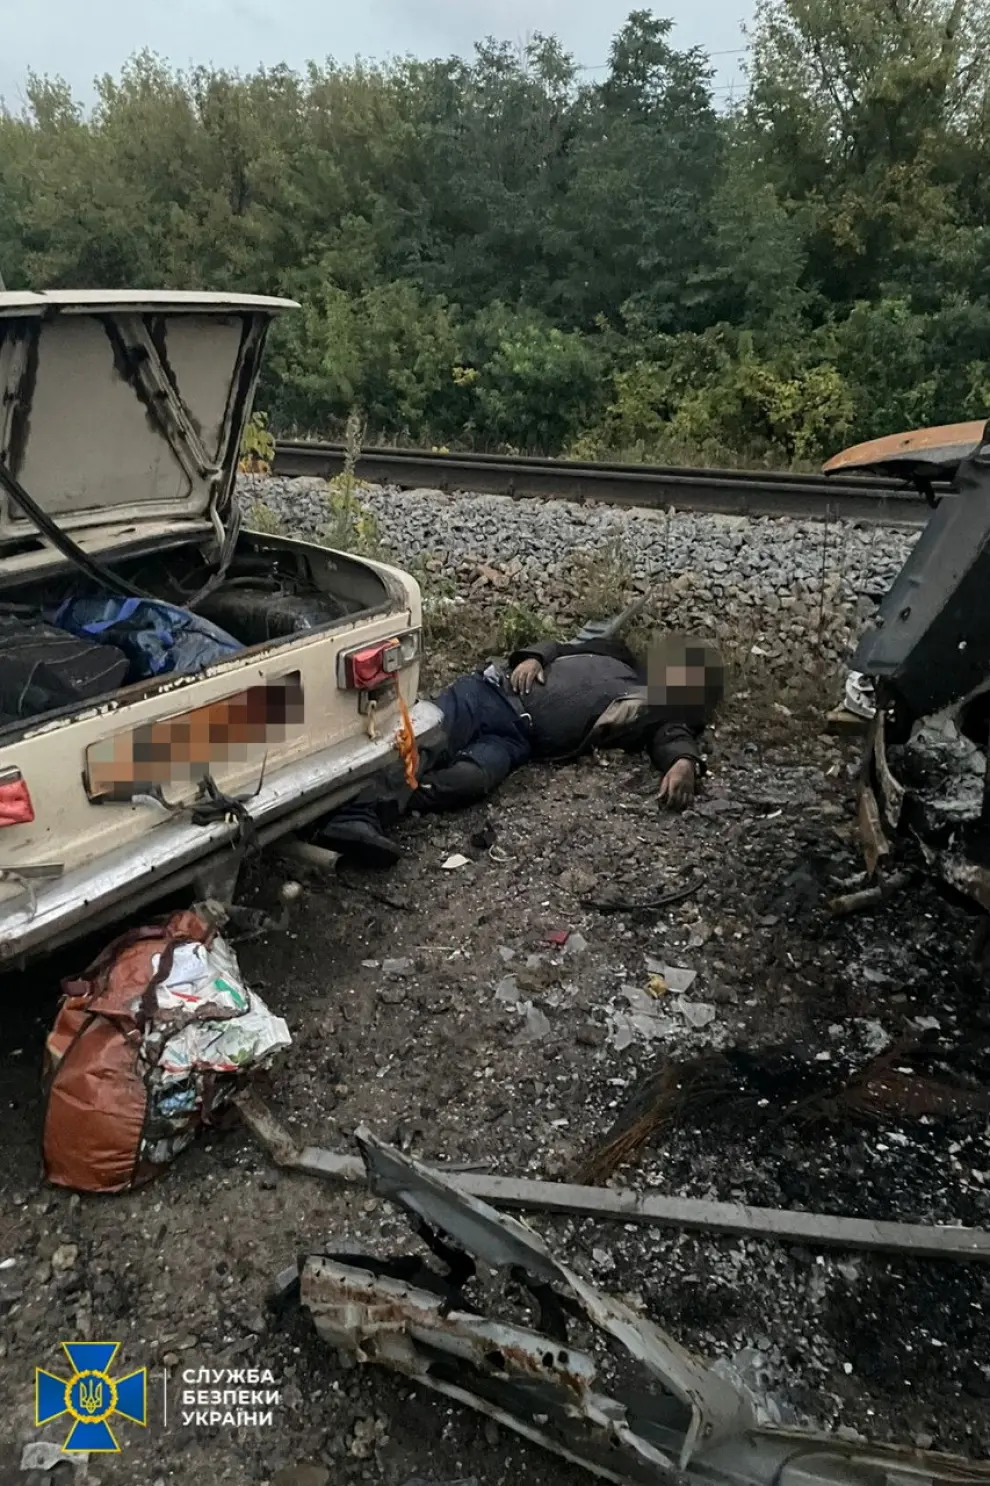 Aftermath of a suspected strike on a civilian convoy on the railway between Svatove and Kupiansk